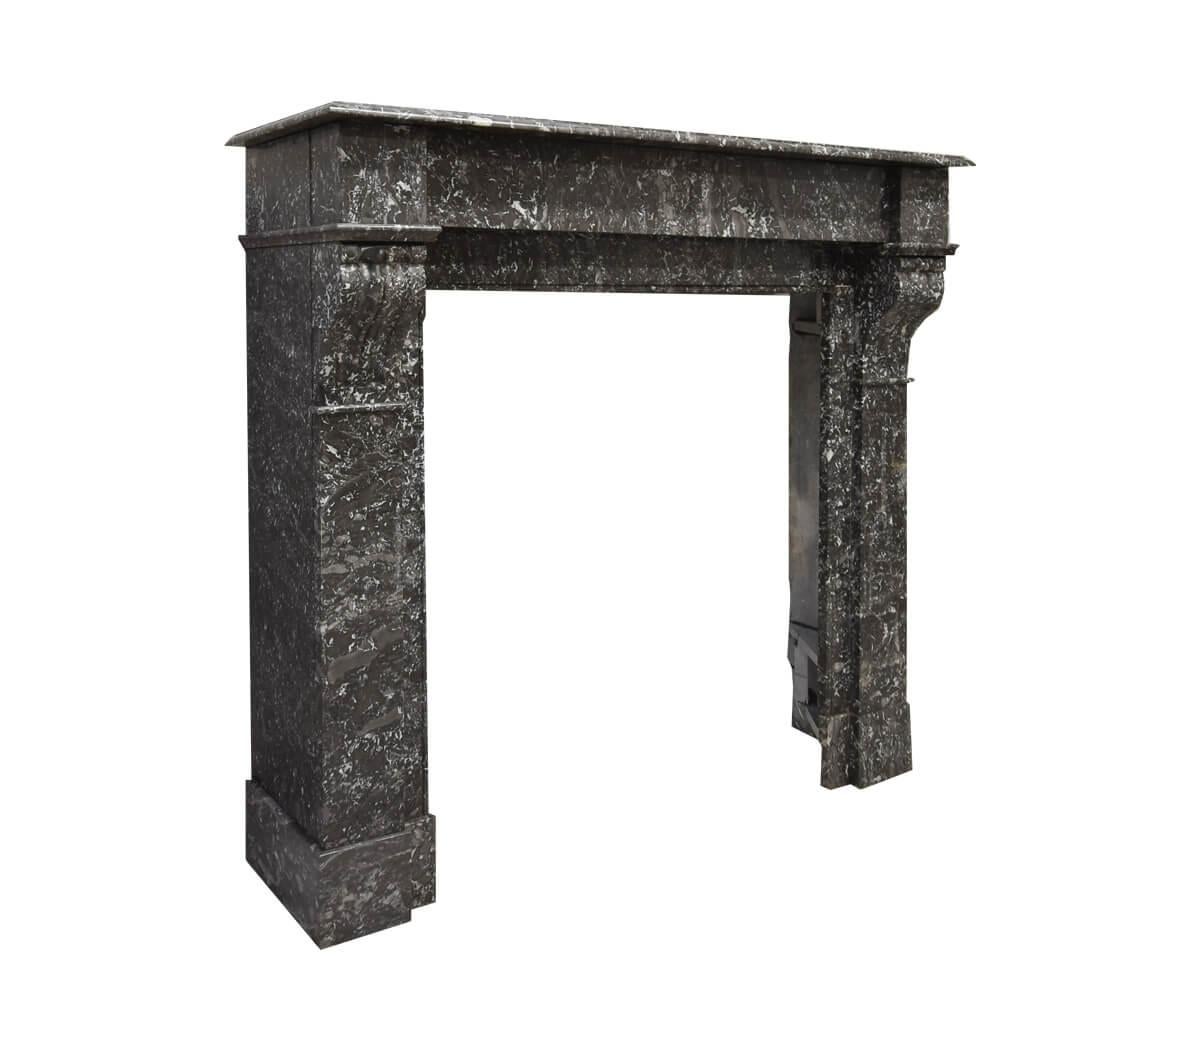 Grey marble Modillion Front fireplace mantel from the 19th Century,
to place in front of the chimney. See the last picture for all dimensions.